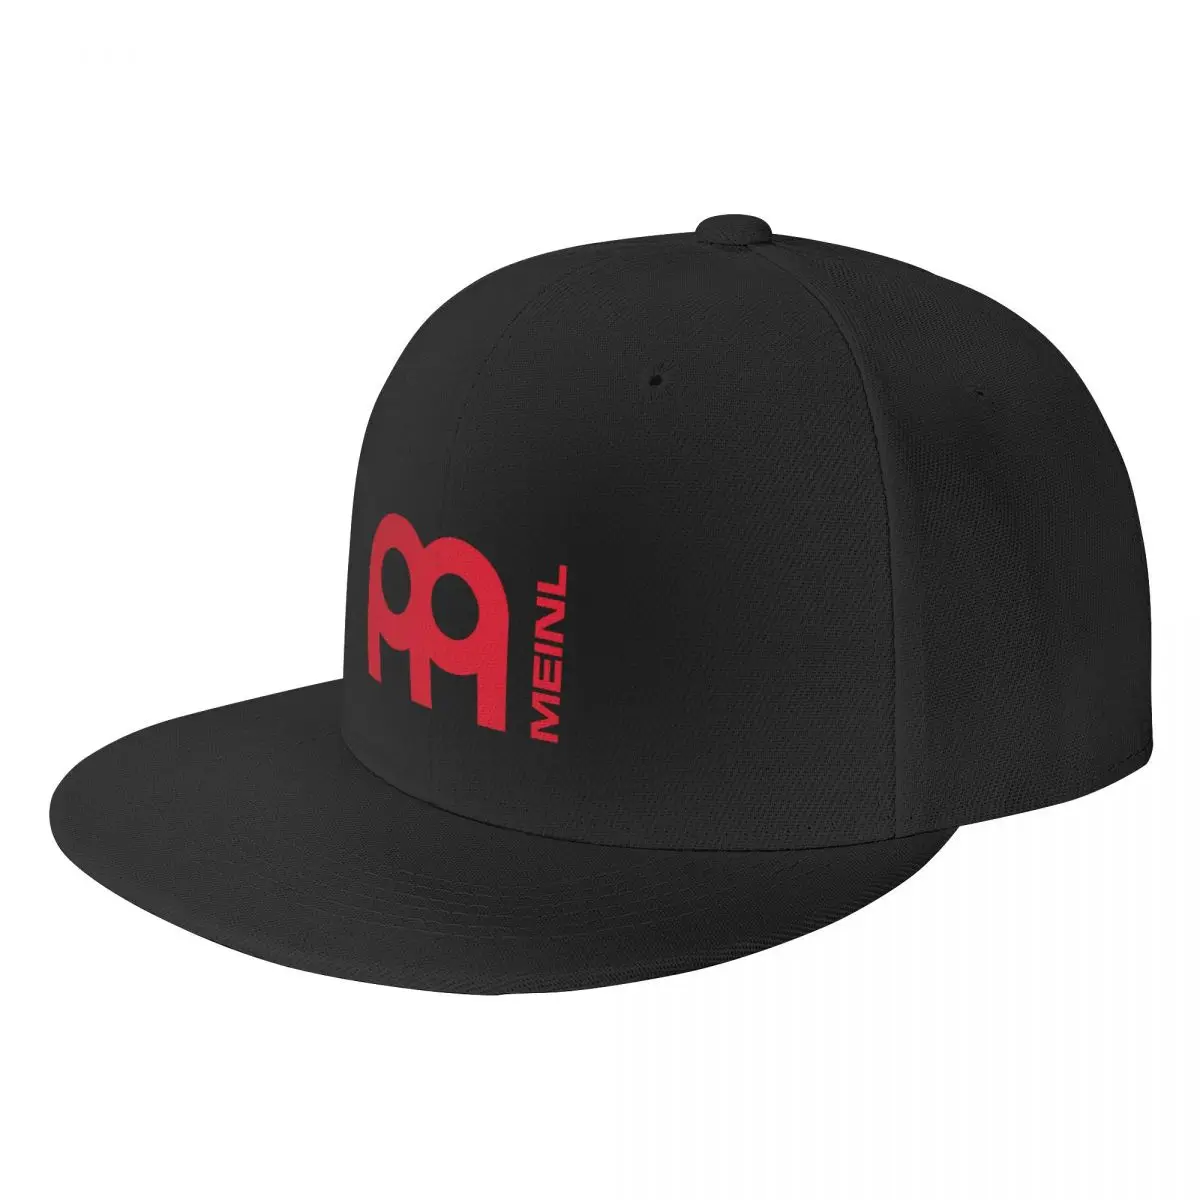 

Meinl Cymbals Classic, Graphic Trending Unisex Youth Love, Aldult, Casual Cute, Hot Idea Baseball Cap Cosplay Hat Male Women's